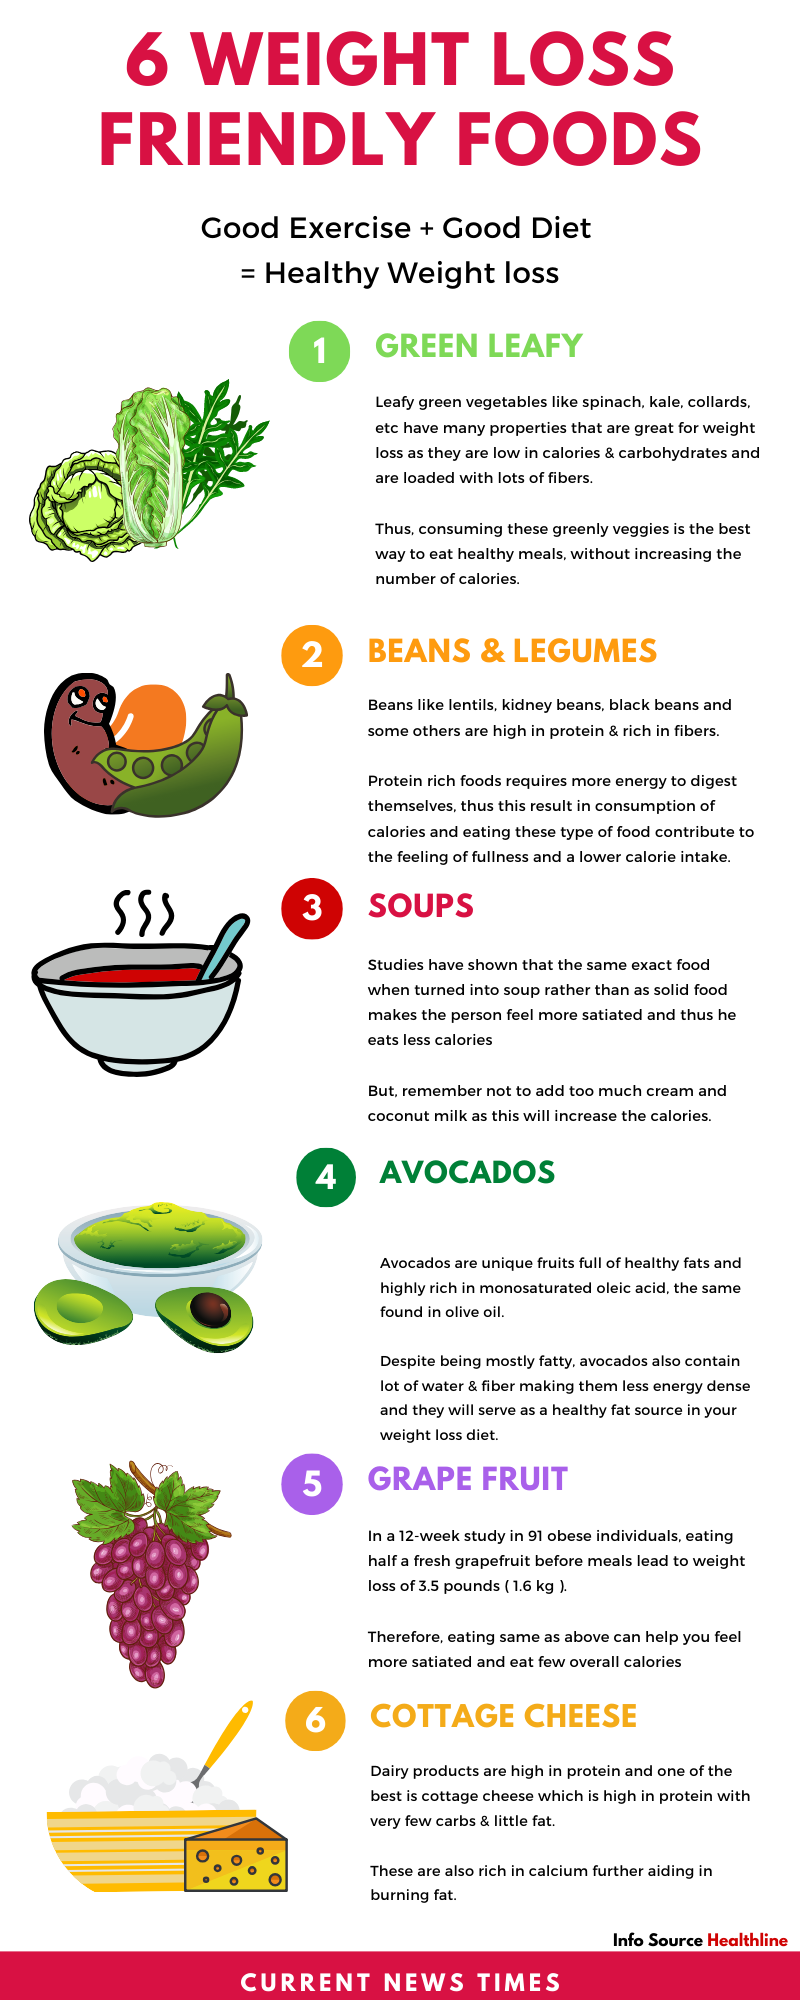 6-Weight-loss-friendly-foods-infographic